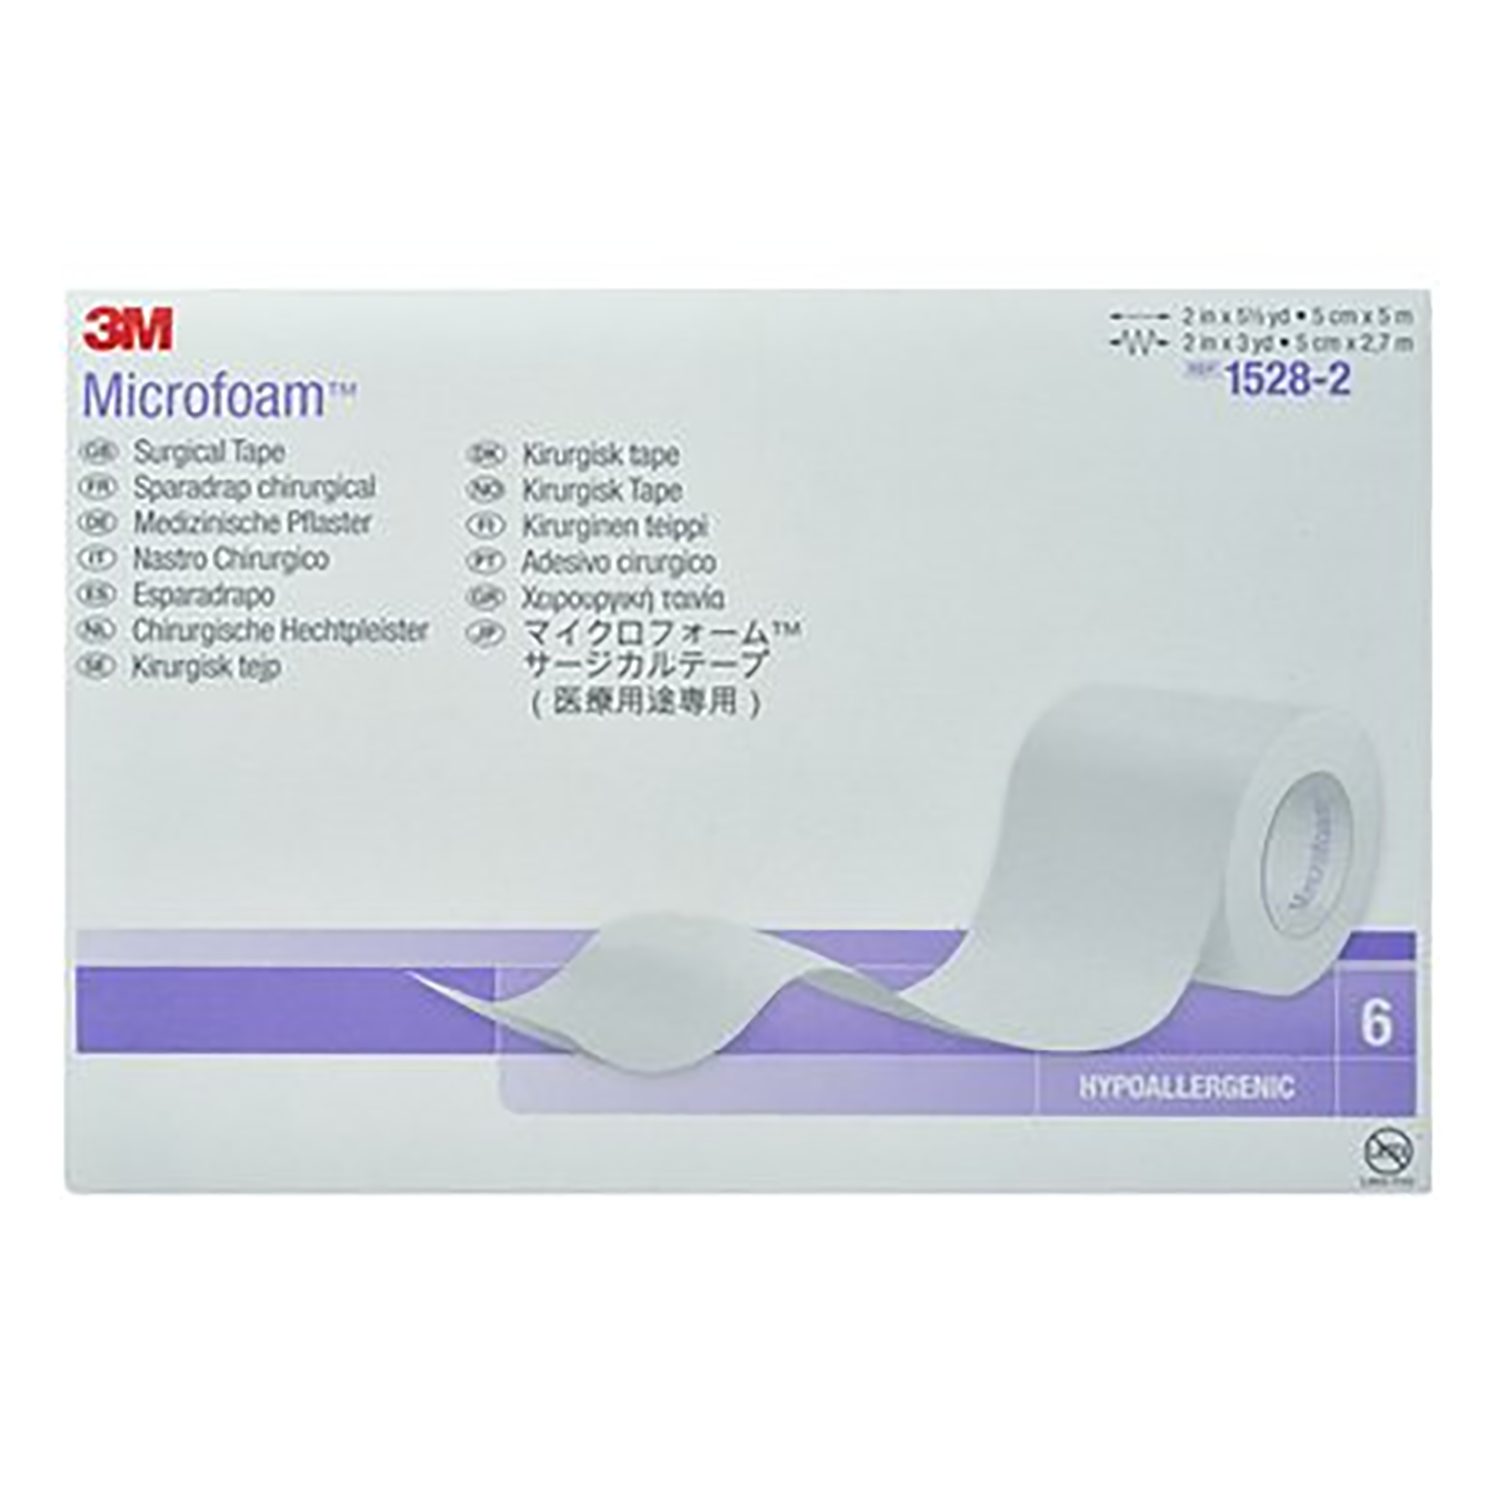 3M Microfoam Surgical Tape | 5cm x 5m | Pack of 6 | Short Expiry Date